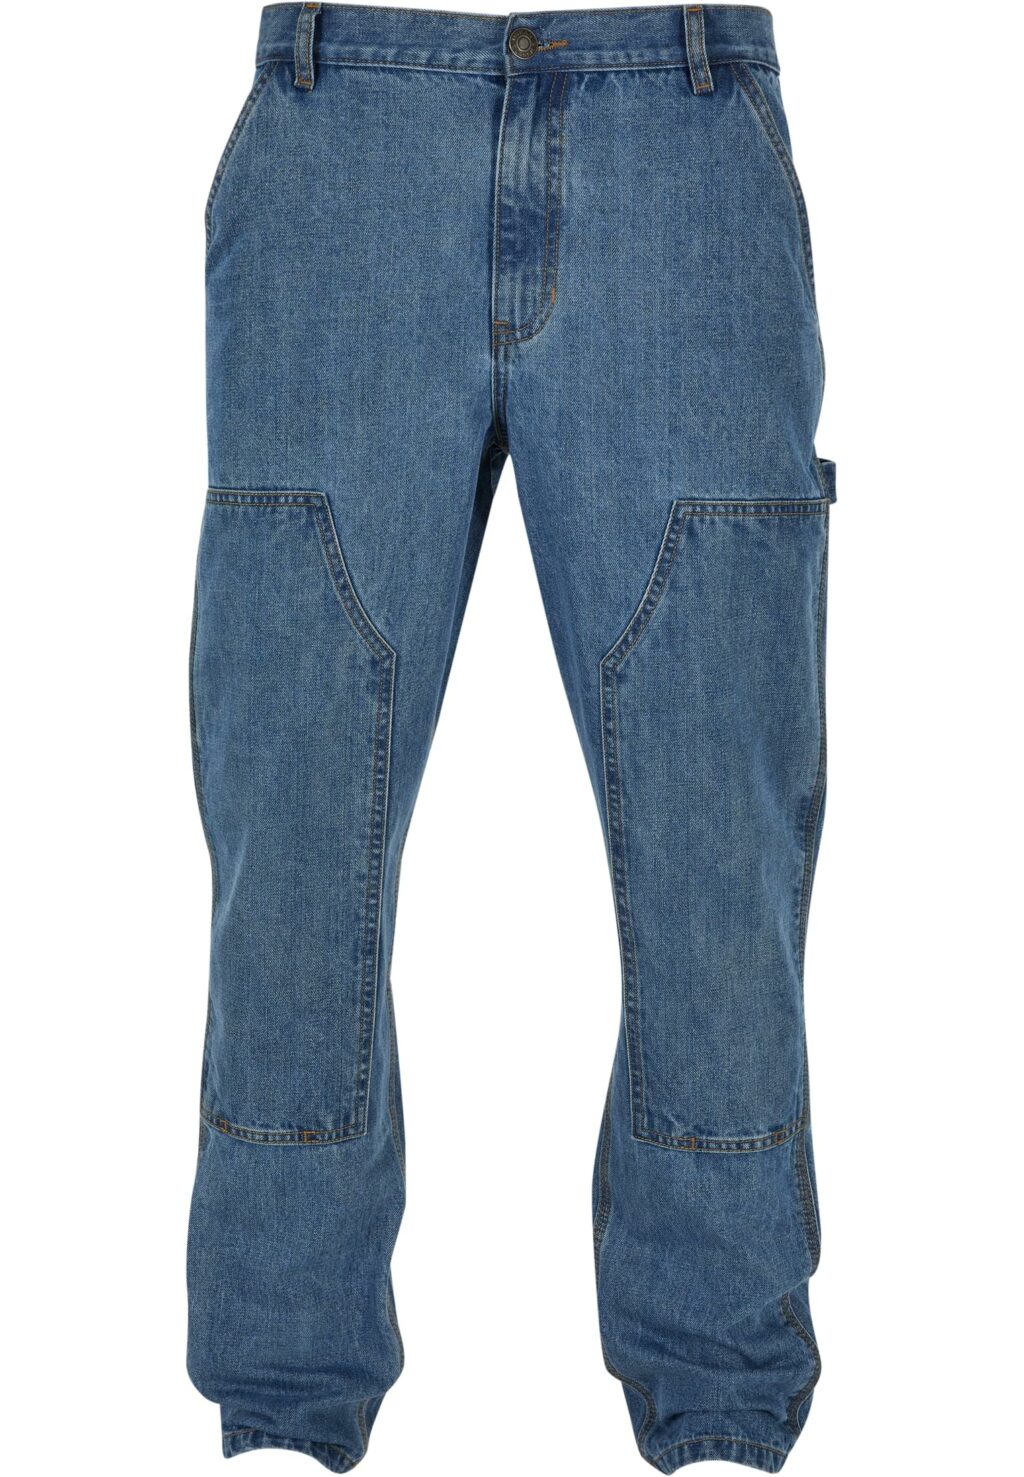 Urban Classics Double Knee Jeans light blue washed TB5590